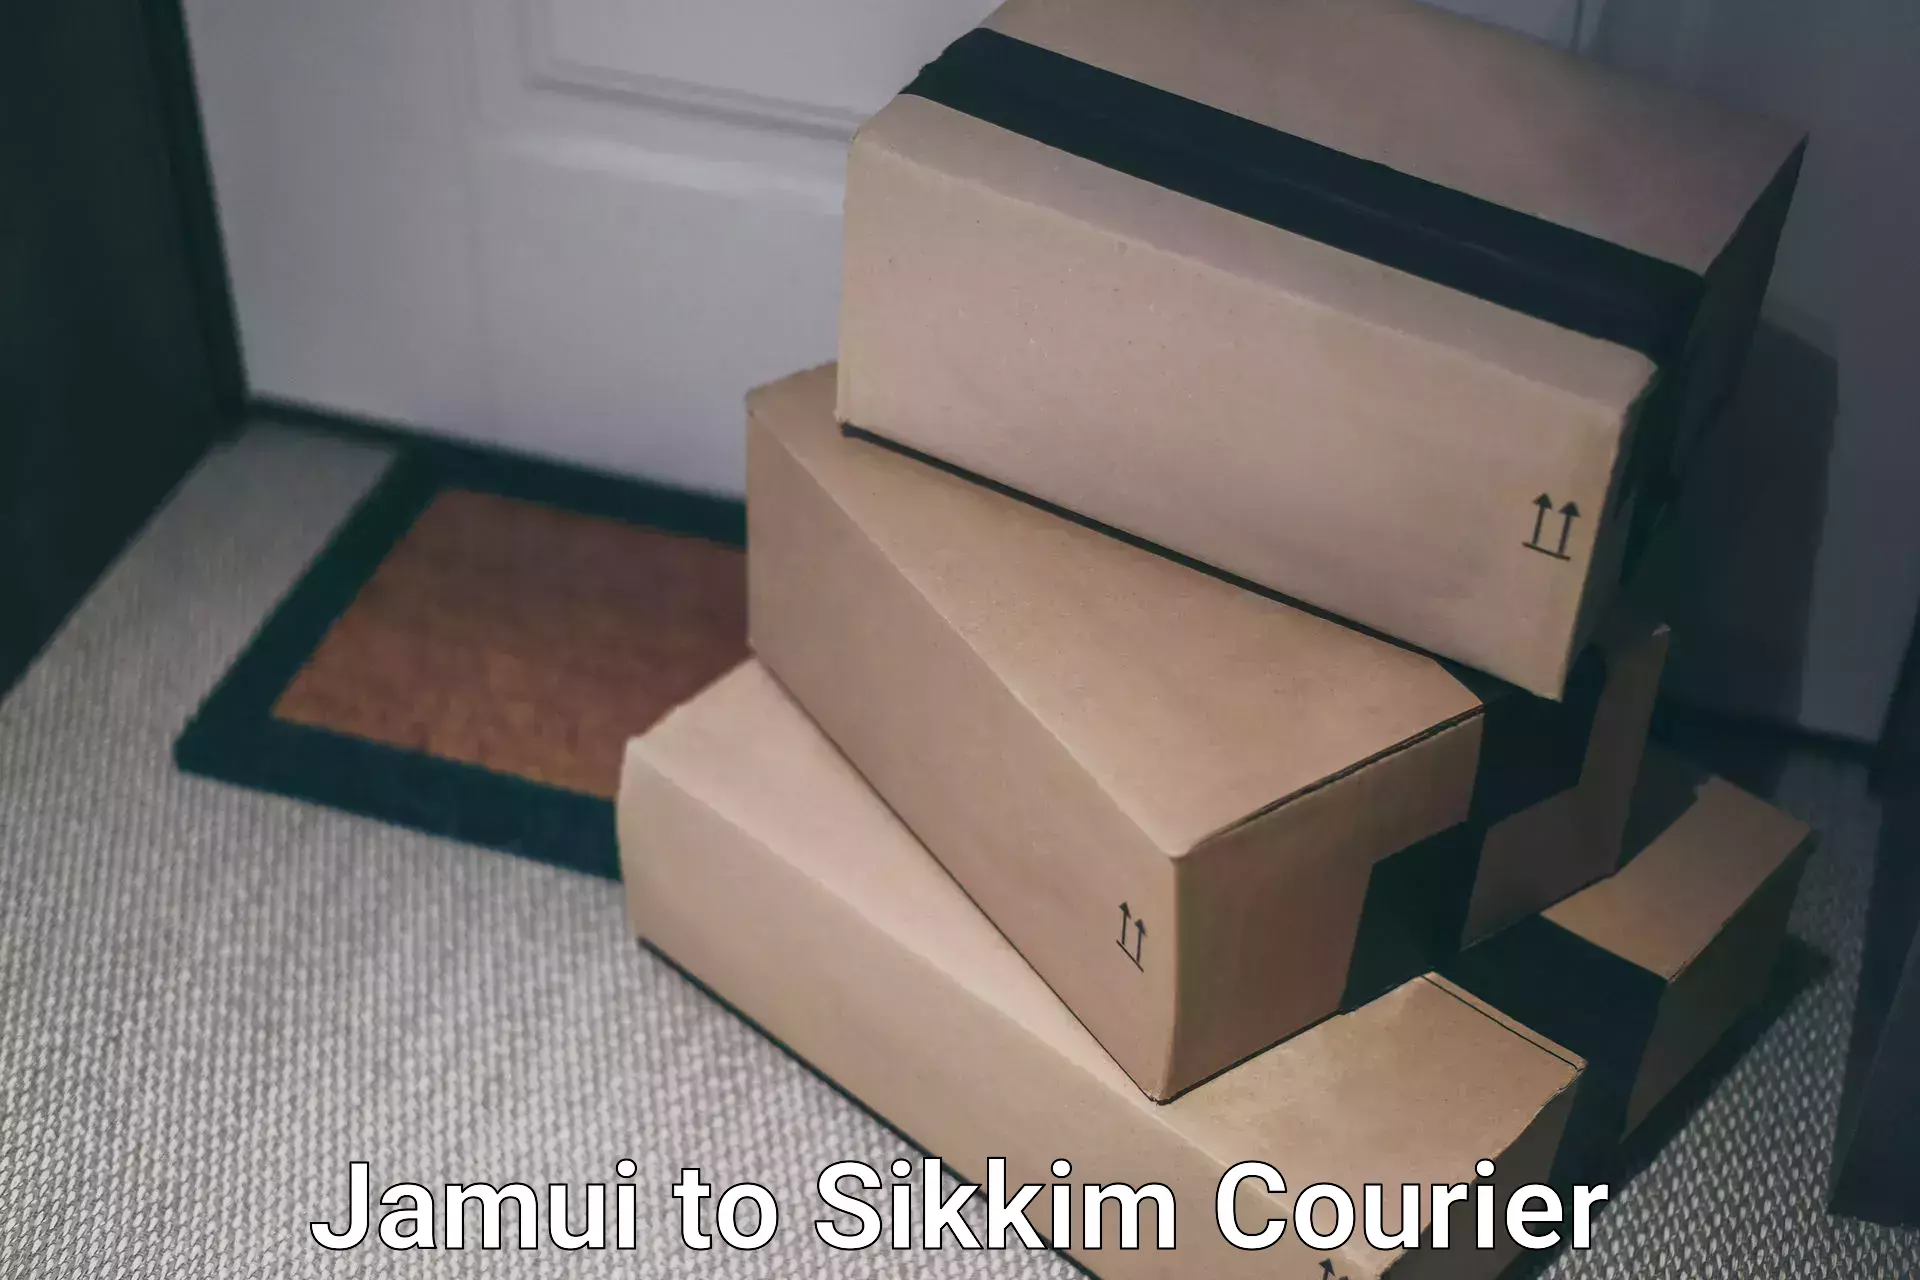 Same-day delivery options in Jamui to Pelling